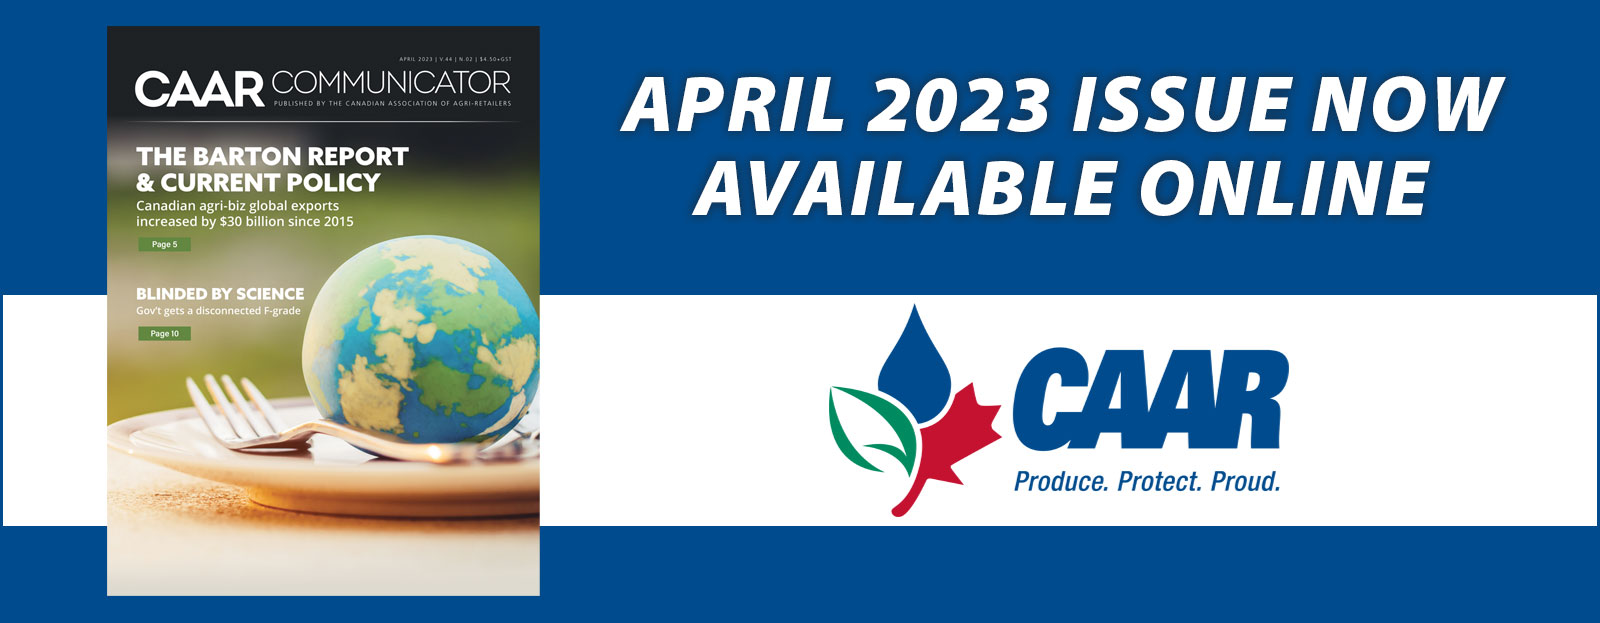 Banner for April 2023 Issue of CAAR Communicator Now Available Online